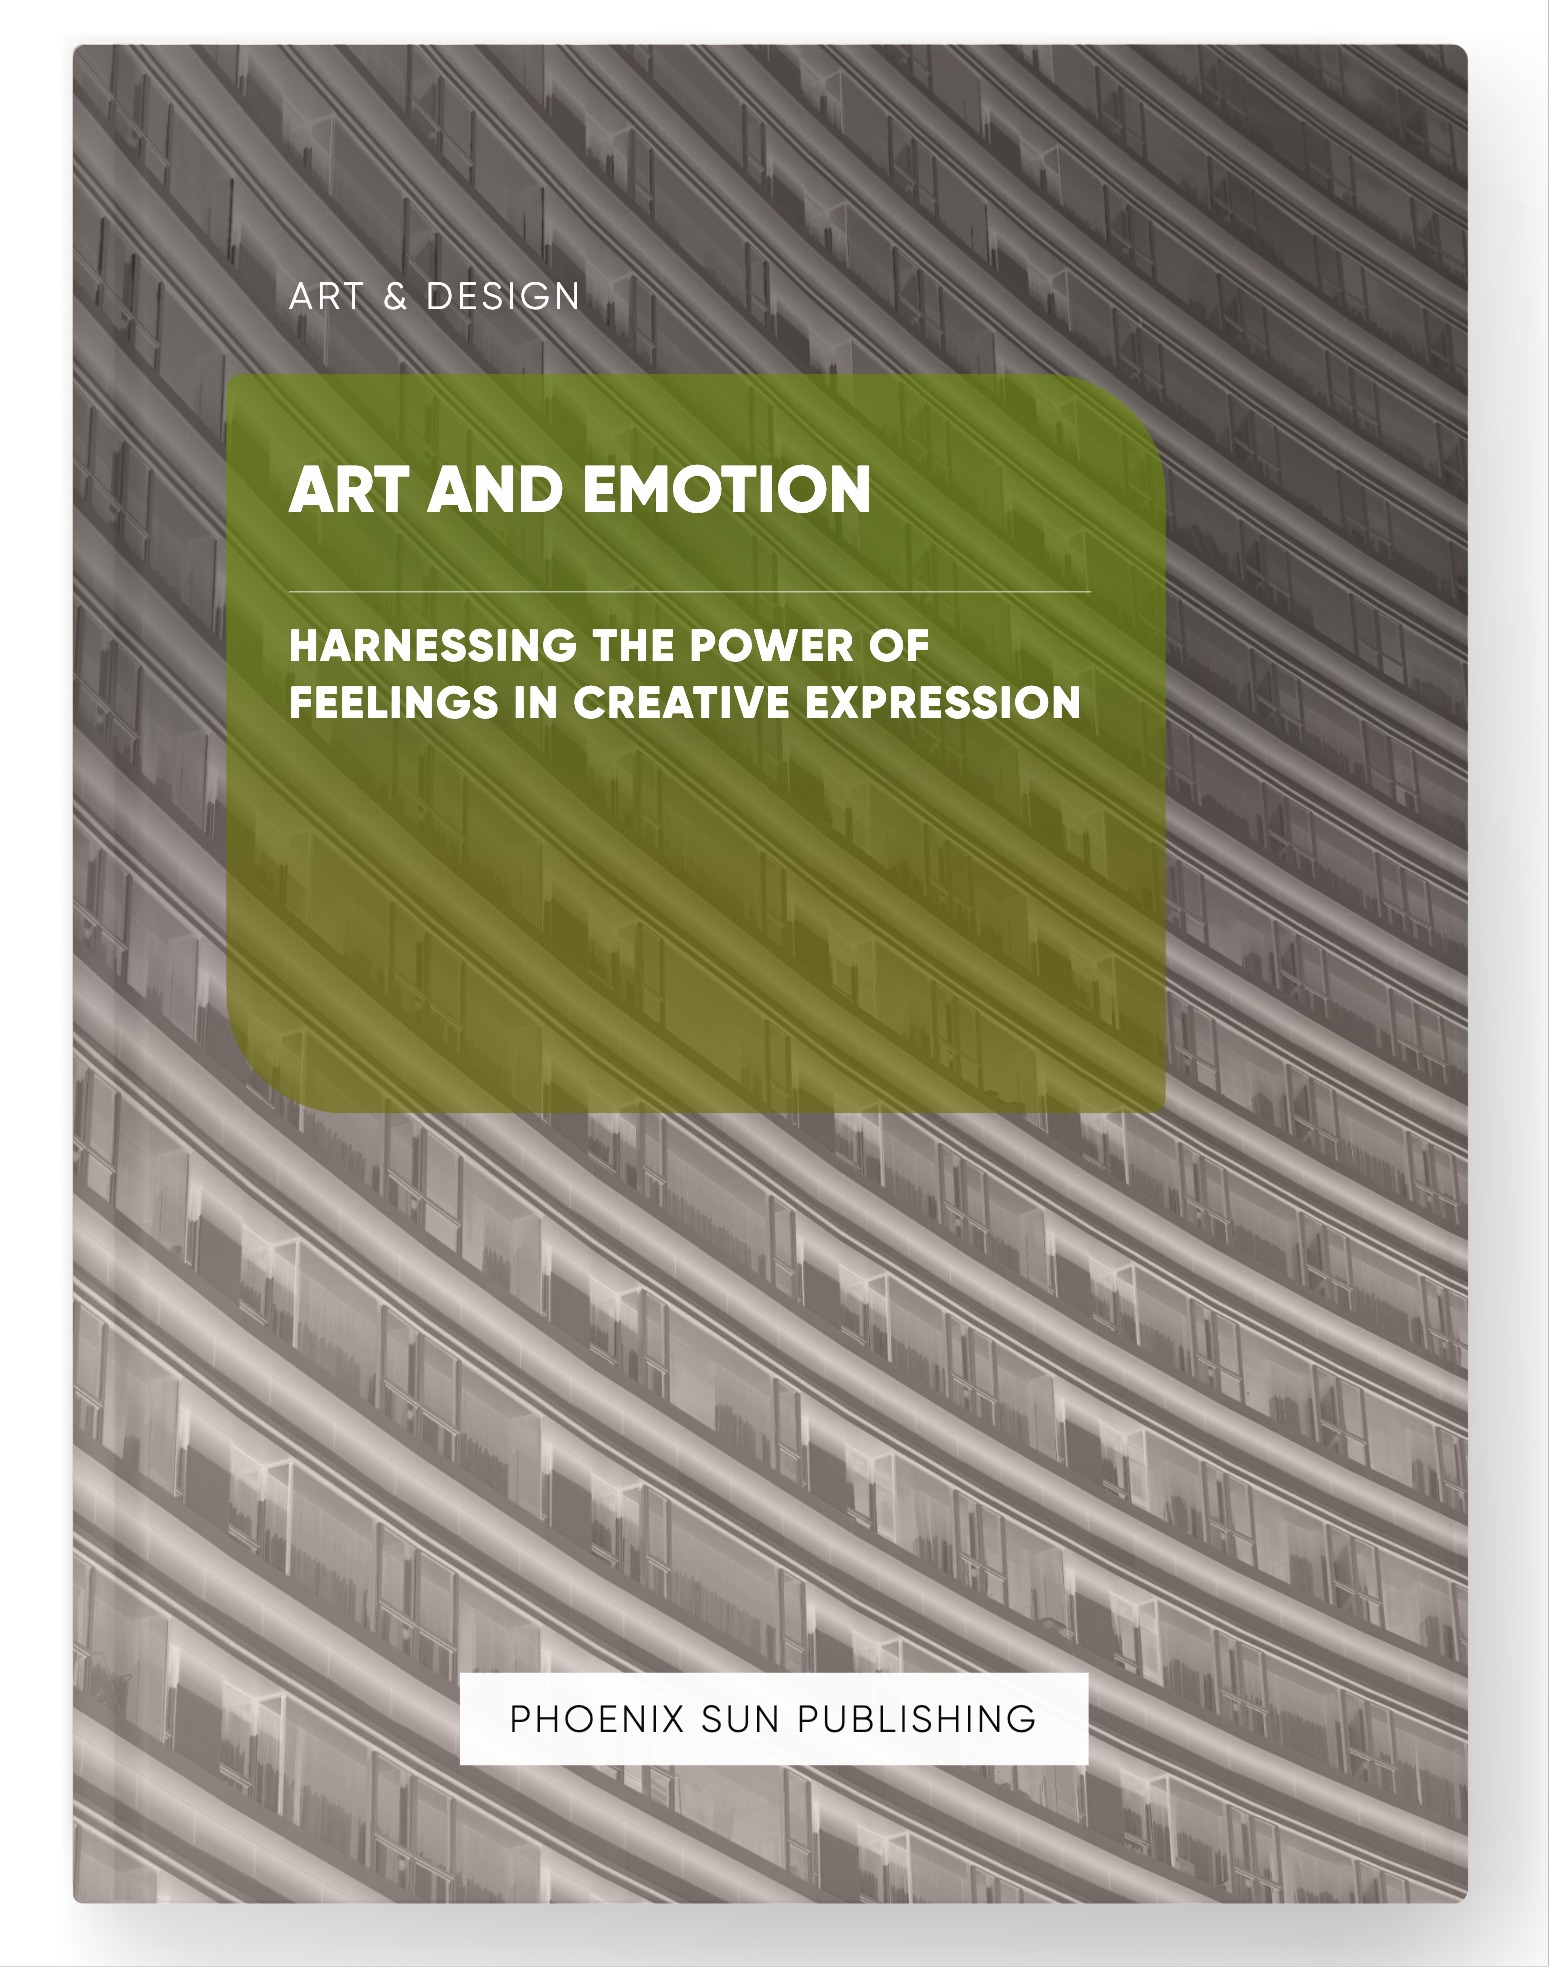 Art and Emotion – Harnessing the Power of Feelings in Creative Expression